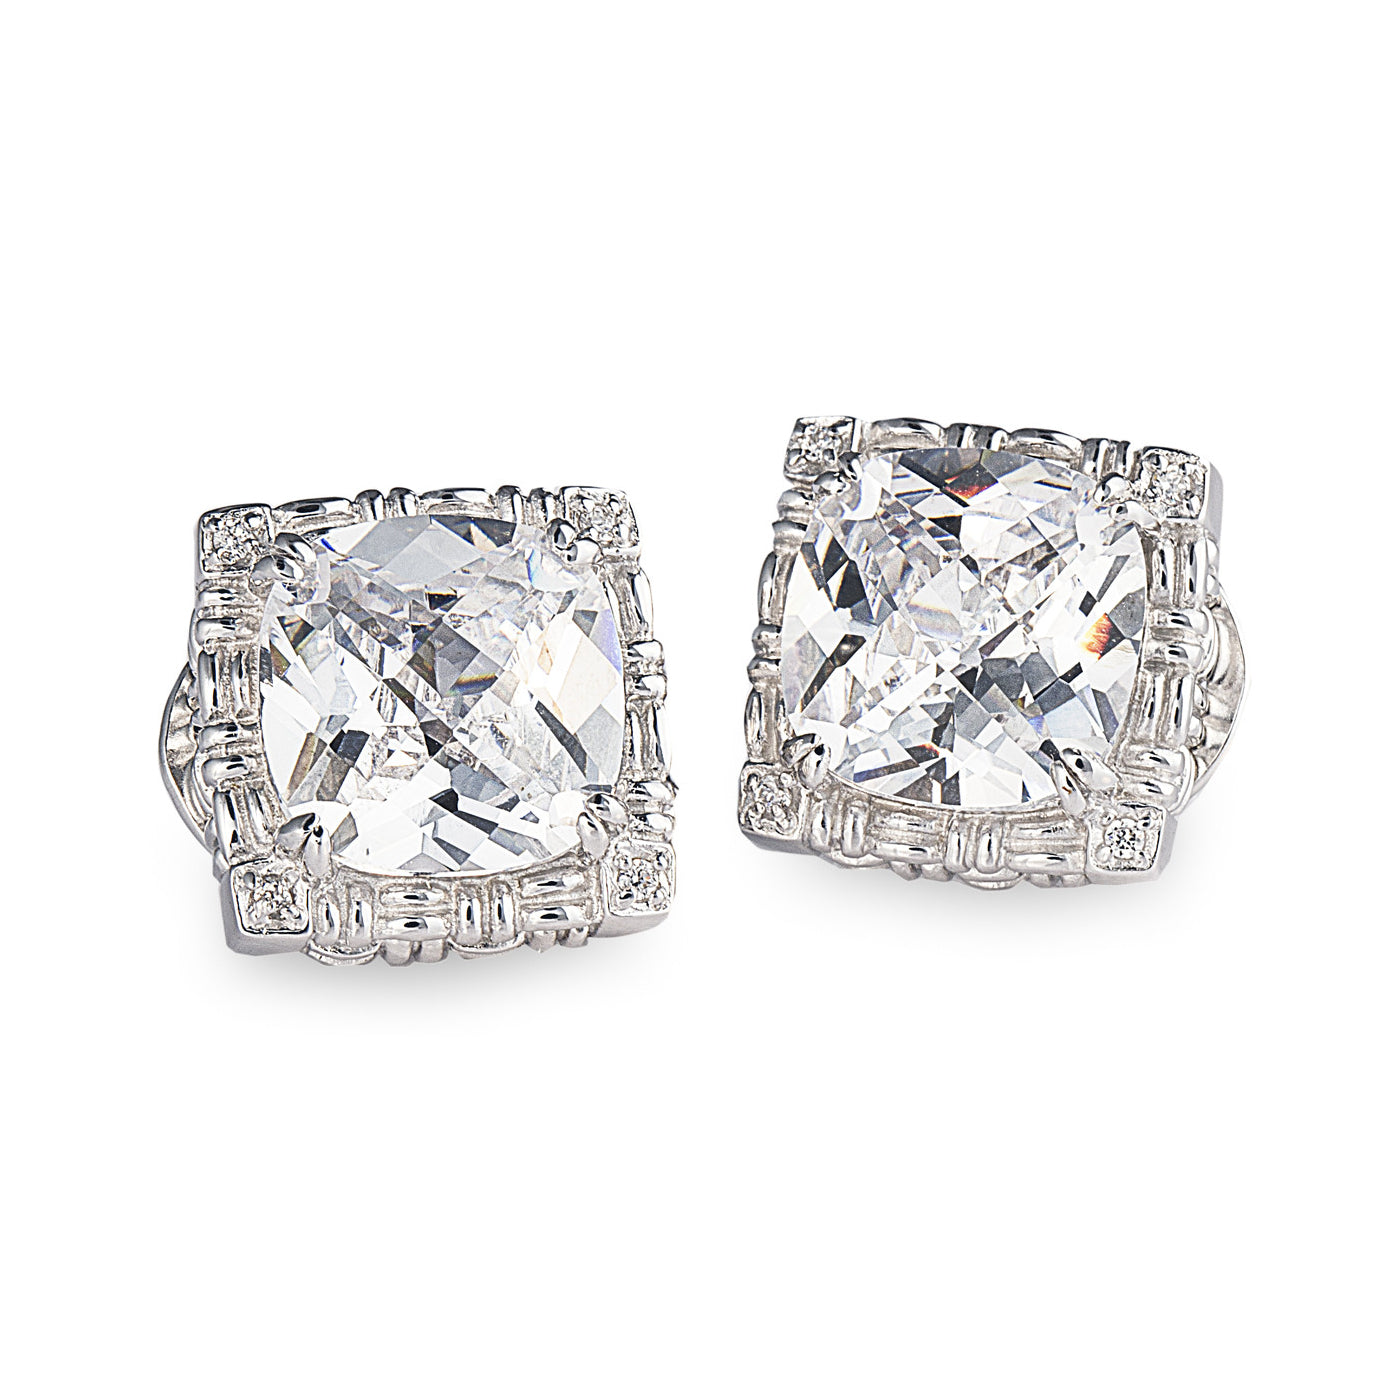 Parisian-inspired Regina Stud Earrings in 925 sterling silver with a large 'princess cut' cubic zirconia stone. Jewellery by Bellagio & Co. Worldwide shipping.